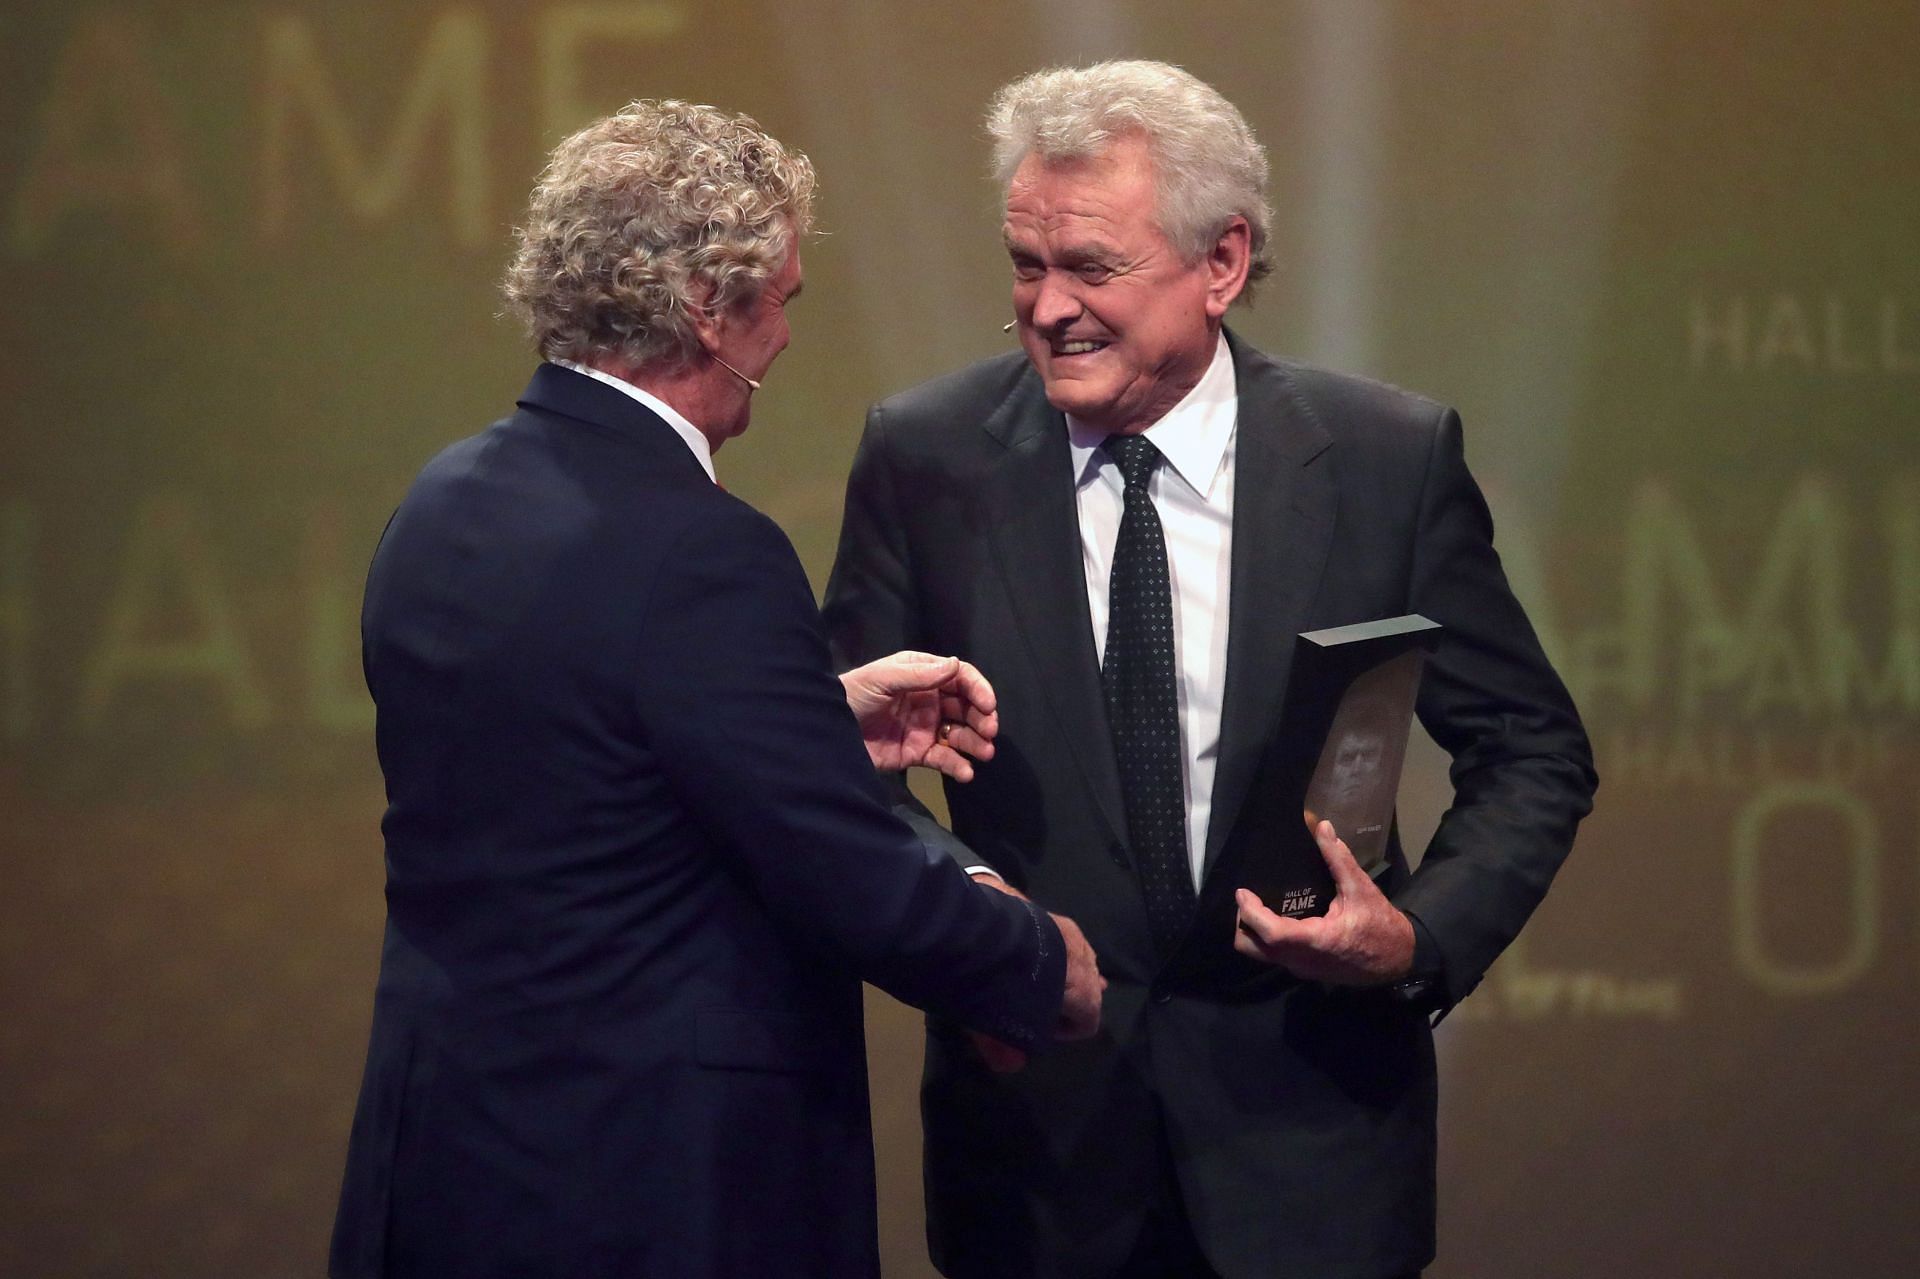 Sepp Maier was elected German Footballer of the Year thrice.